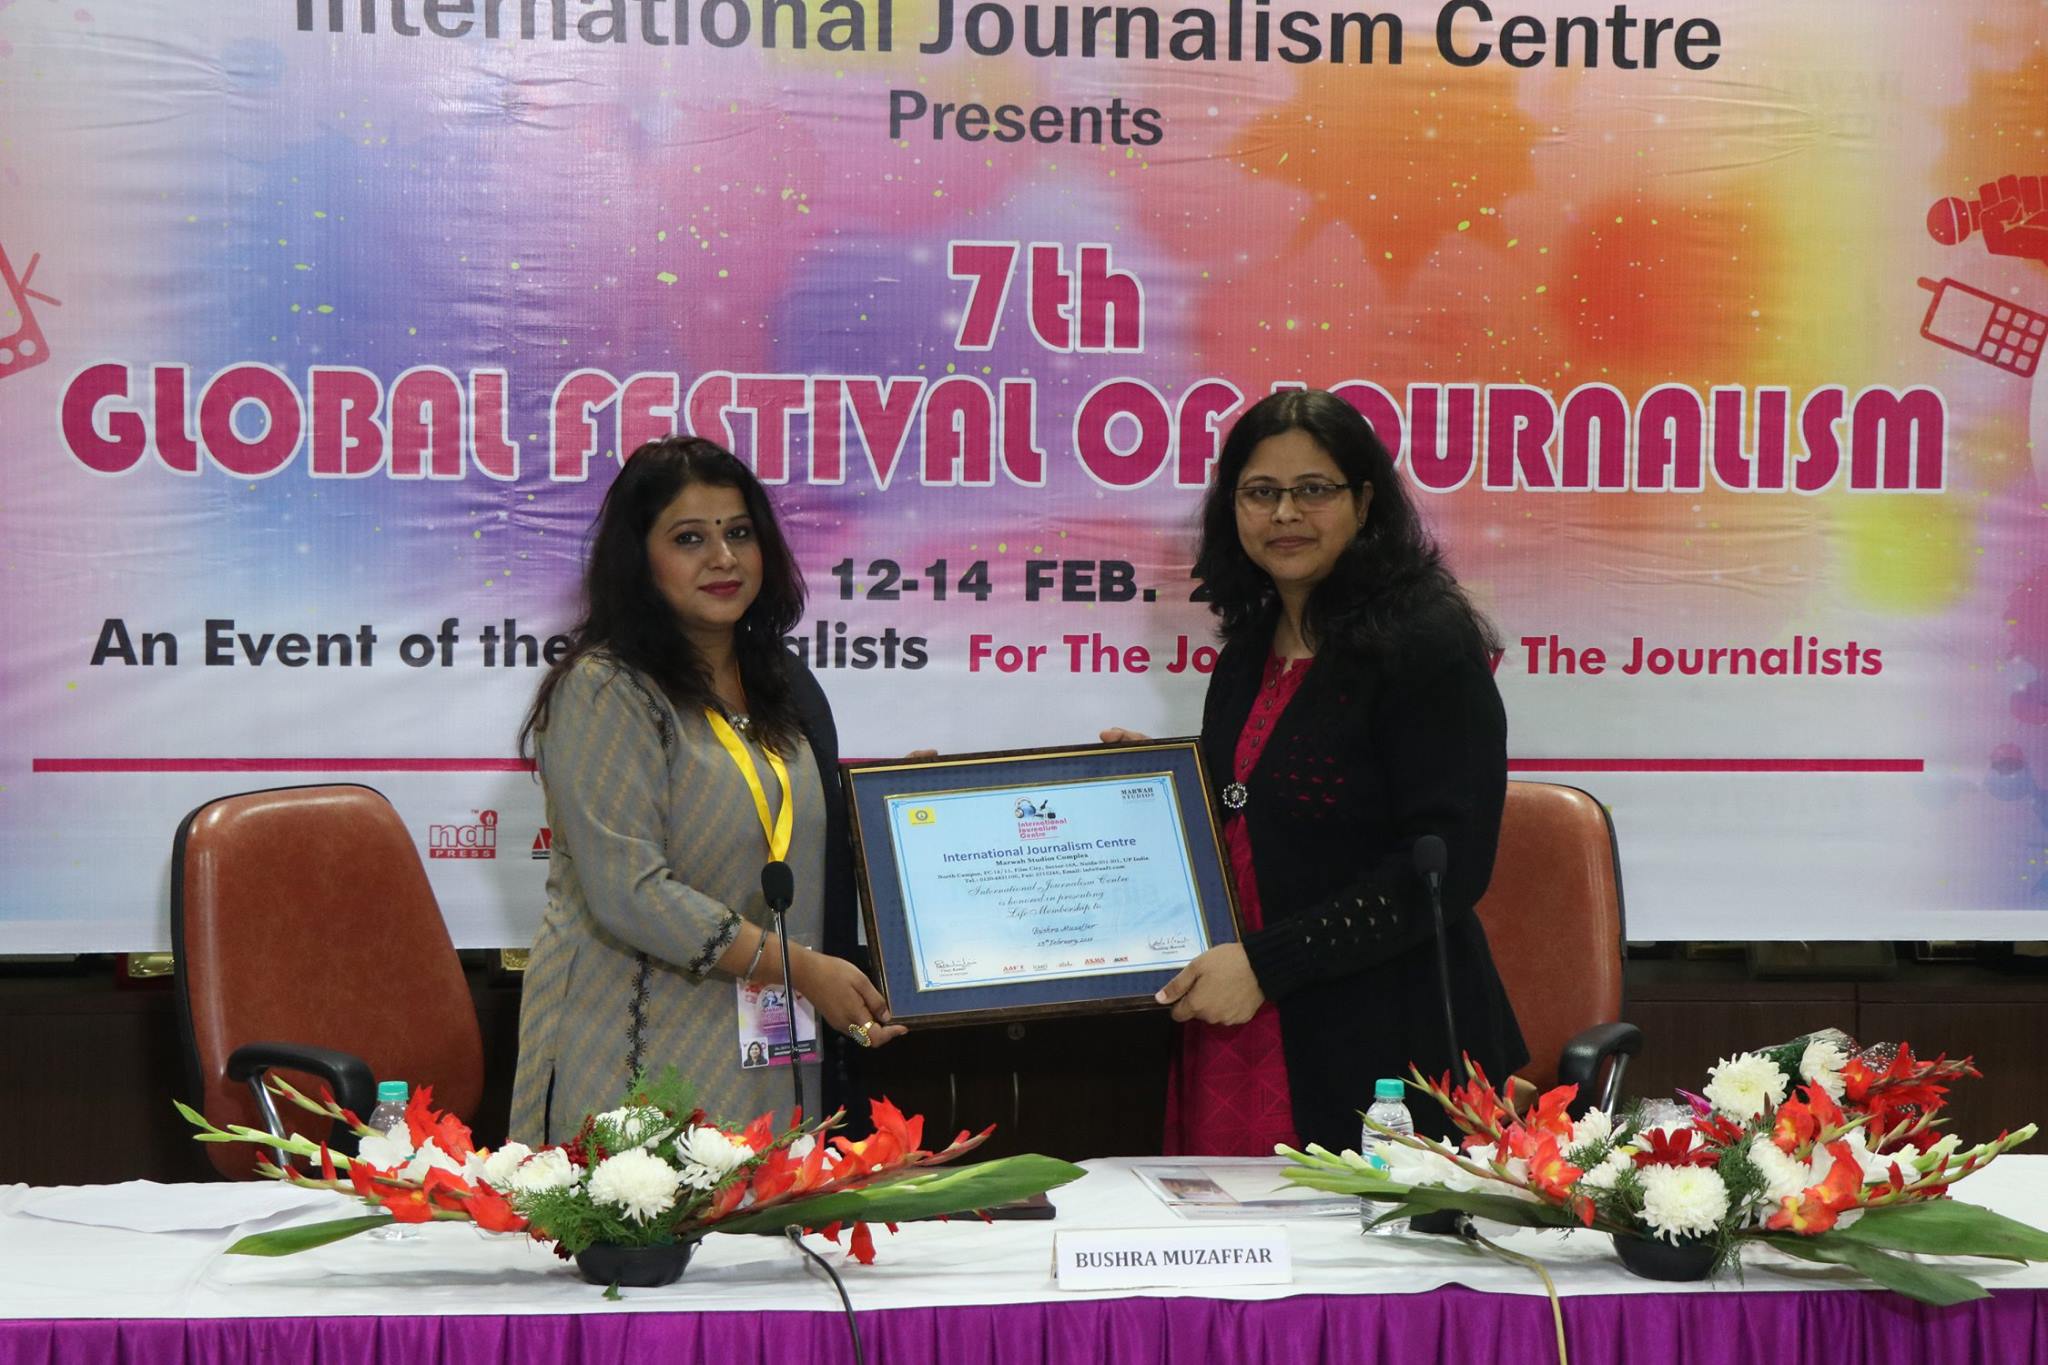 Awarded Life Membership of International Journalism Centre at 7th Global Festival of Journalism